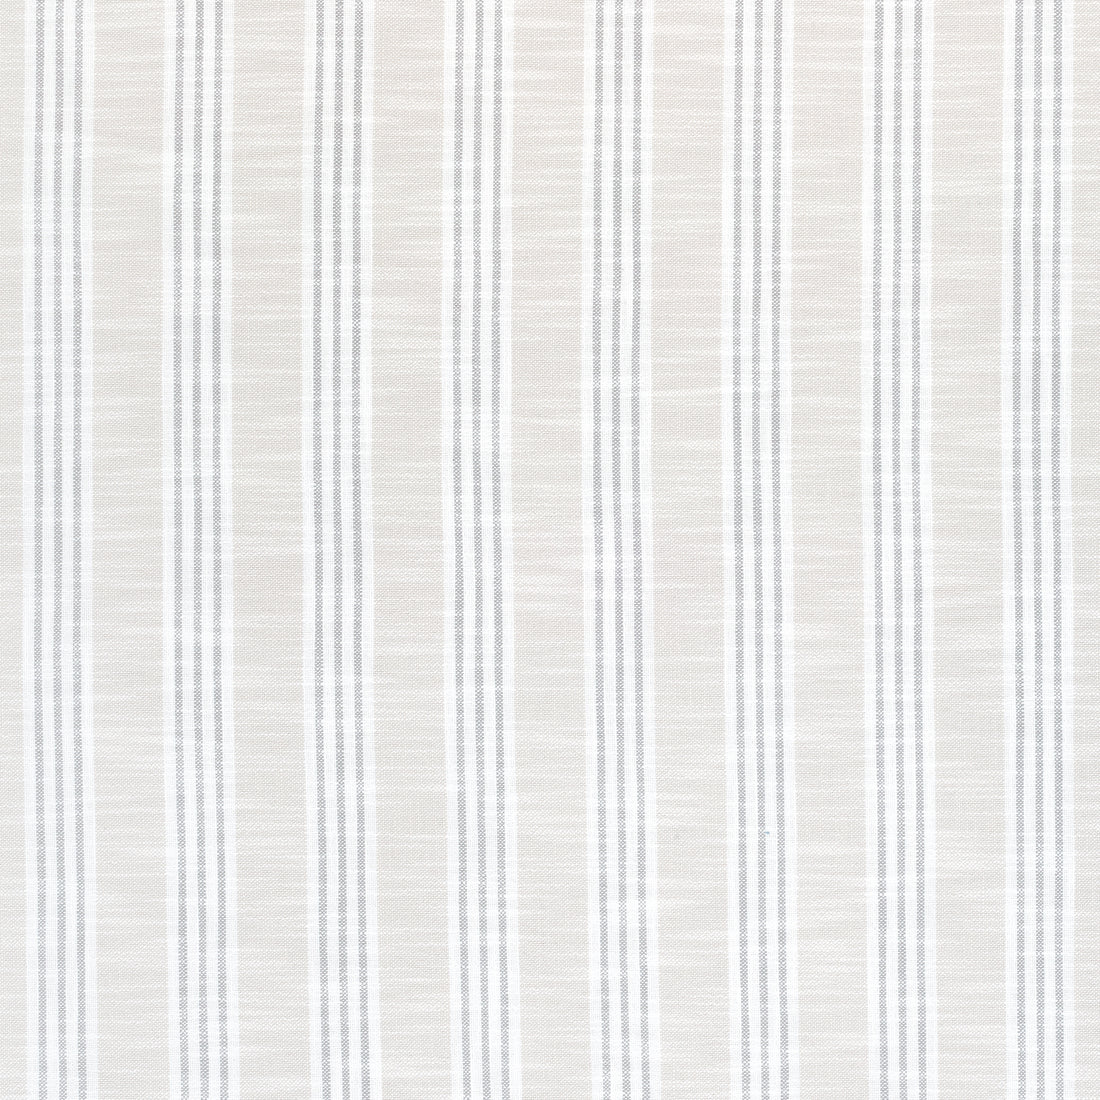 Southport Stripe fabric in flax and grey color - pattern number W73492 - by Thibaut in the Landmark collection